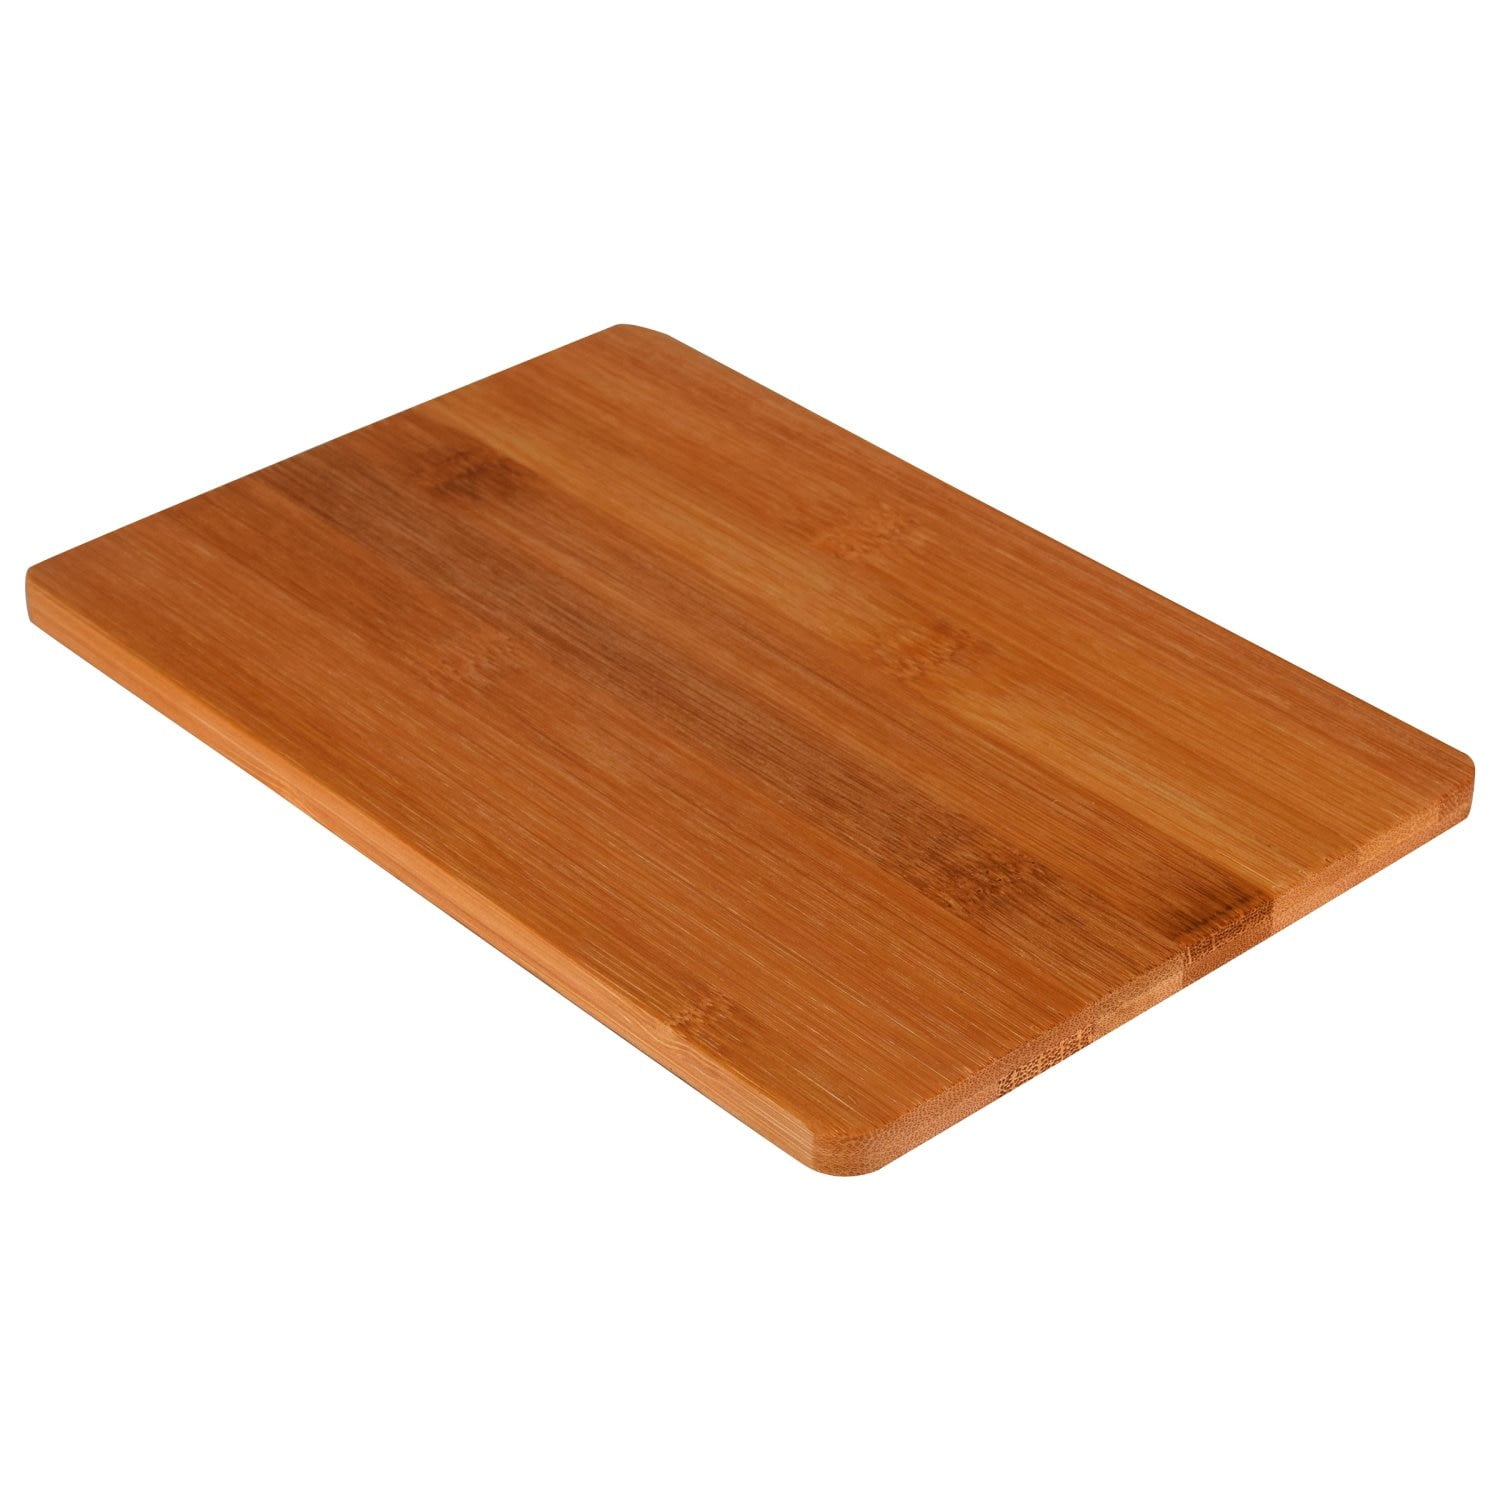 Serving Vegetables Meat Kitchen Details about   3 Piece Bamboo Cutting Board Set 